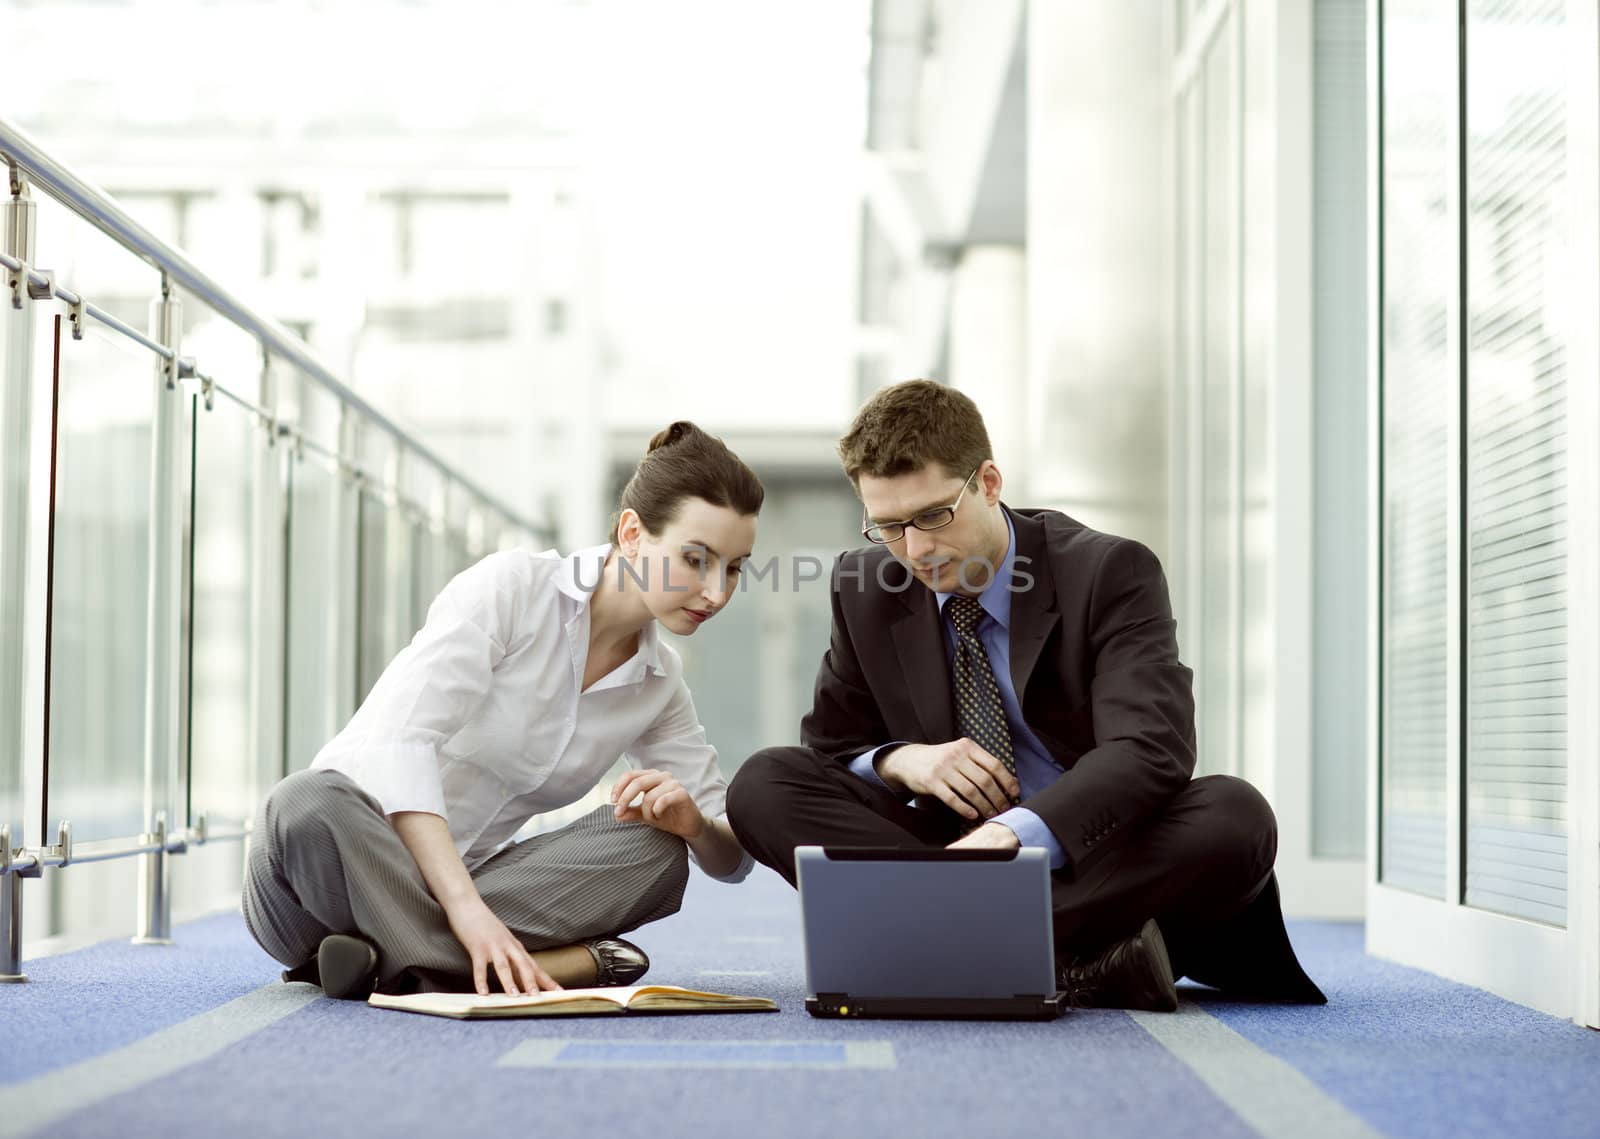 Business couple portrait - young man and woman working together on the floor